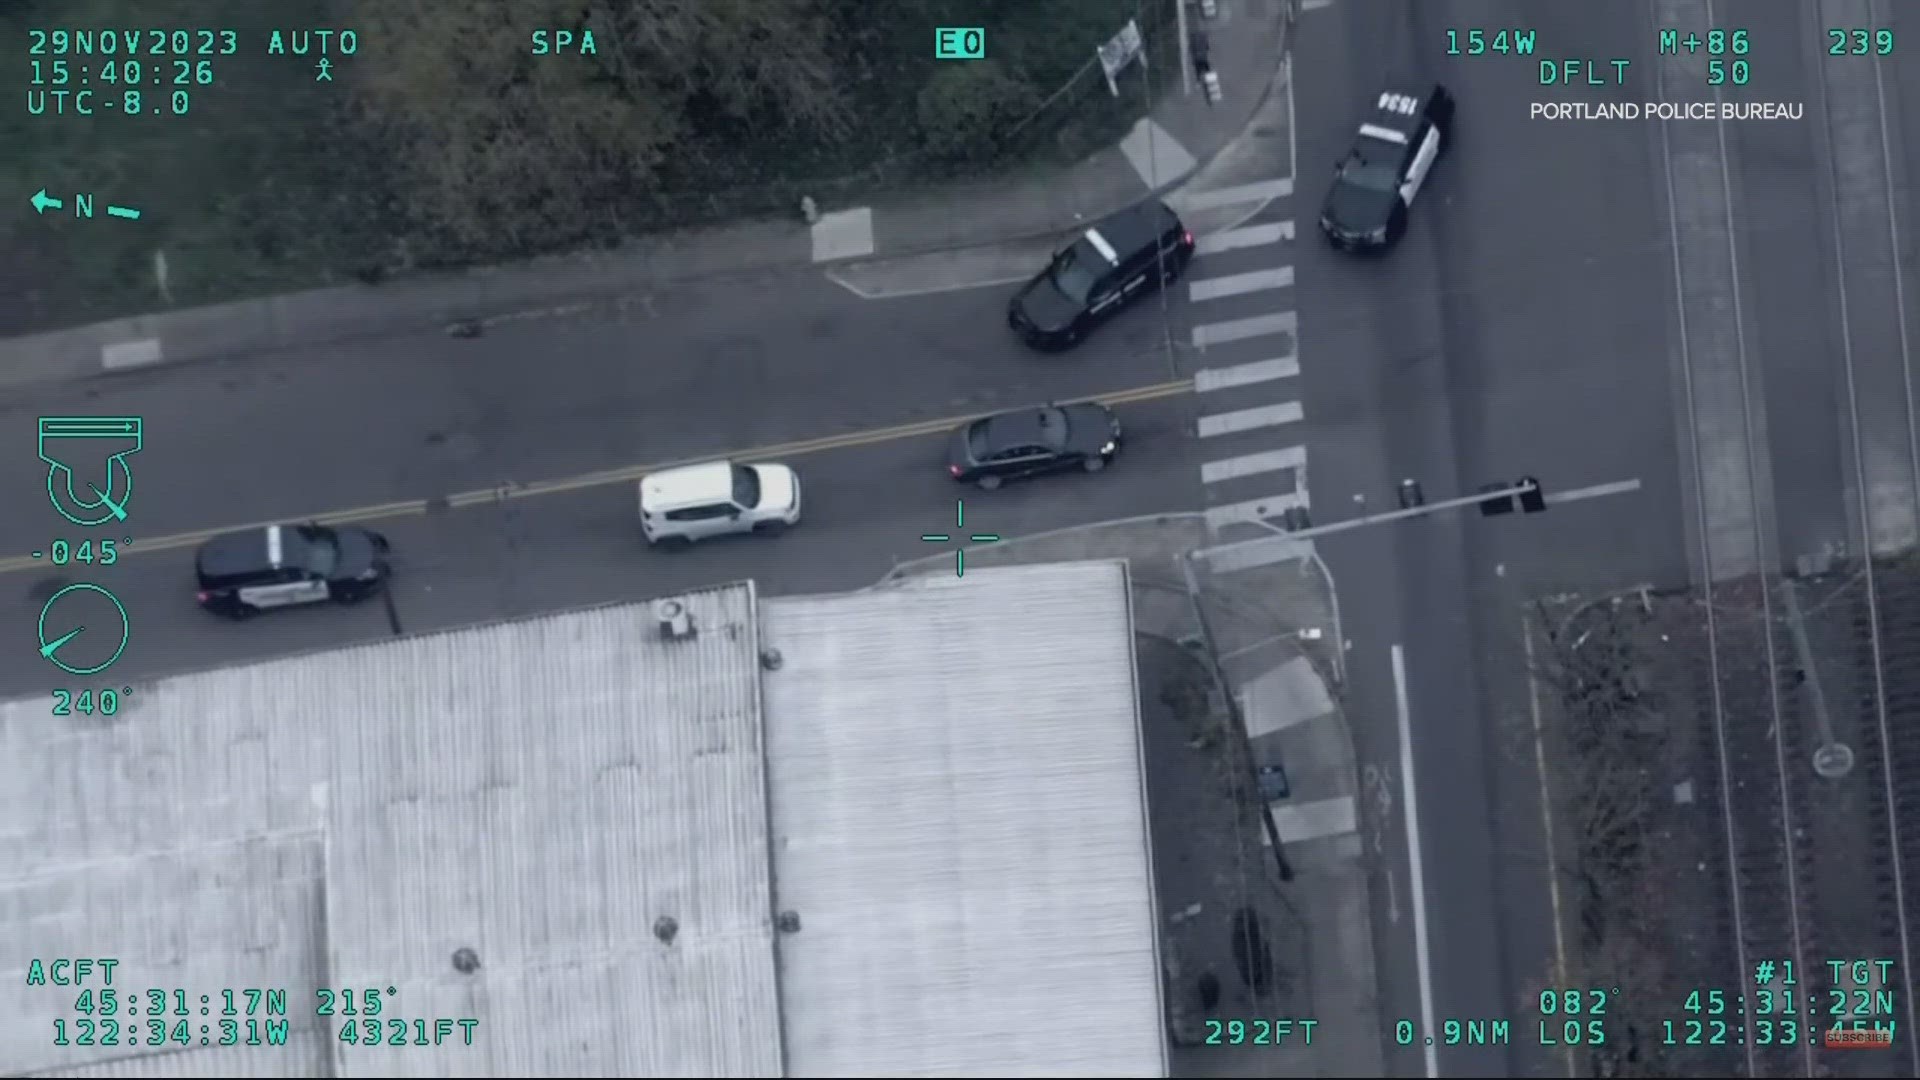 Portland Police said Friday that starting next month, a new policy allows more car chases.